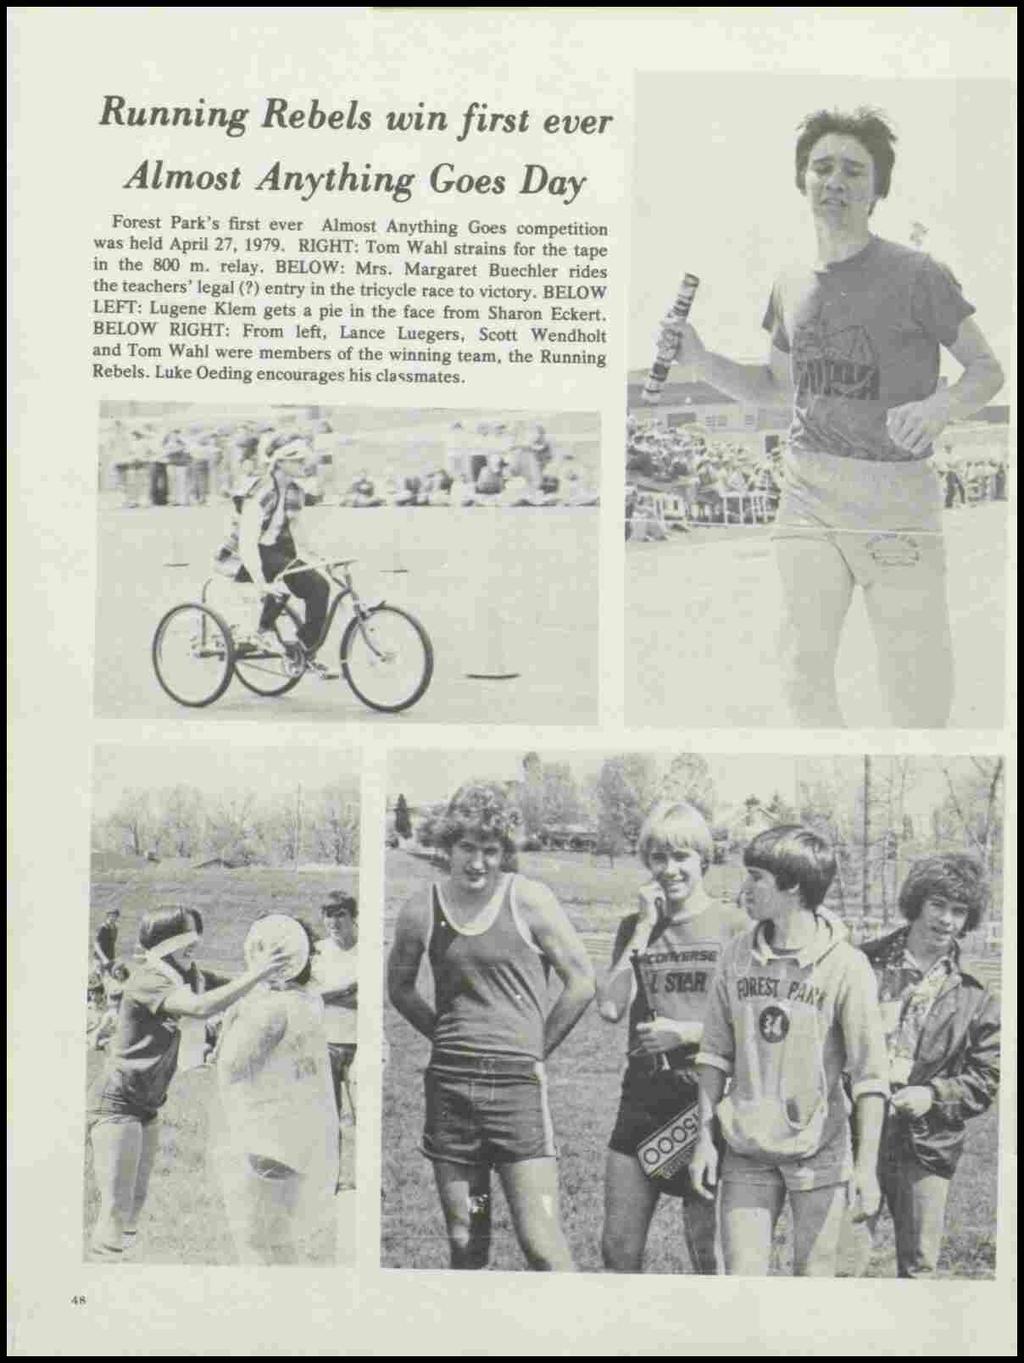 Running Rebels win first ever Almost Anything Goes Day Forest Park's first ever Almost Anything Goes competition was held April 27, 1979. RIGHT: Tom Wahl strains for the tape in the 800 m. relay.